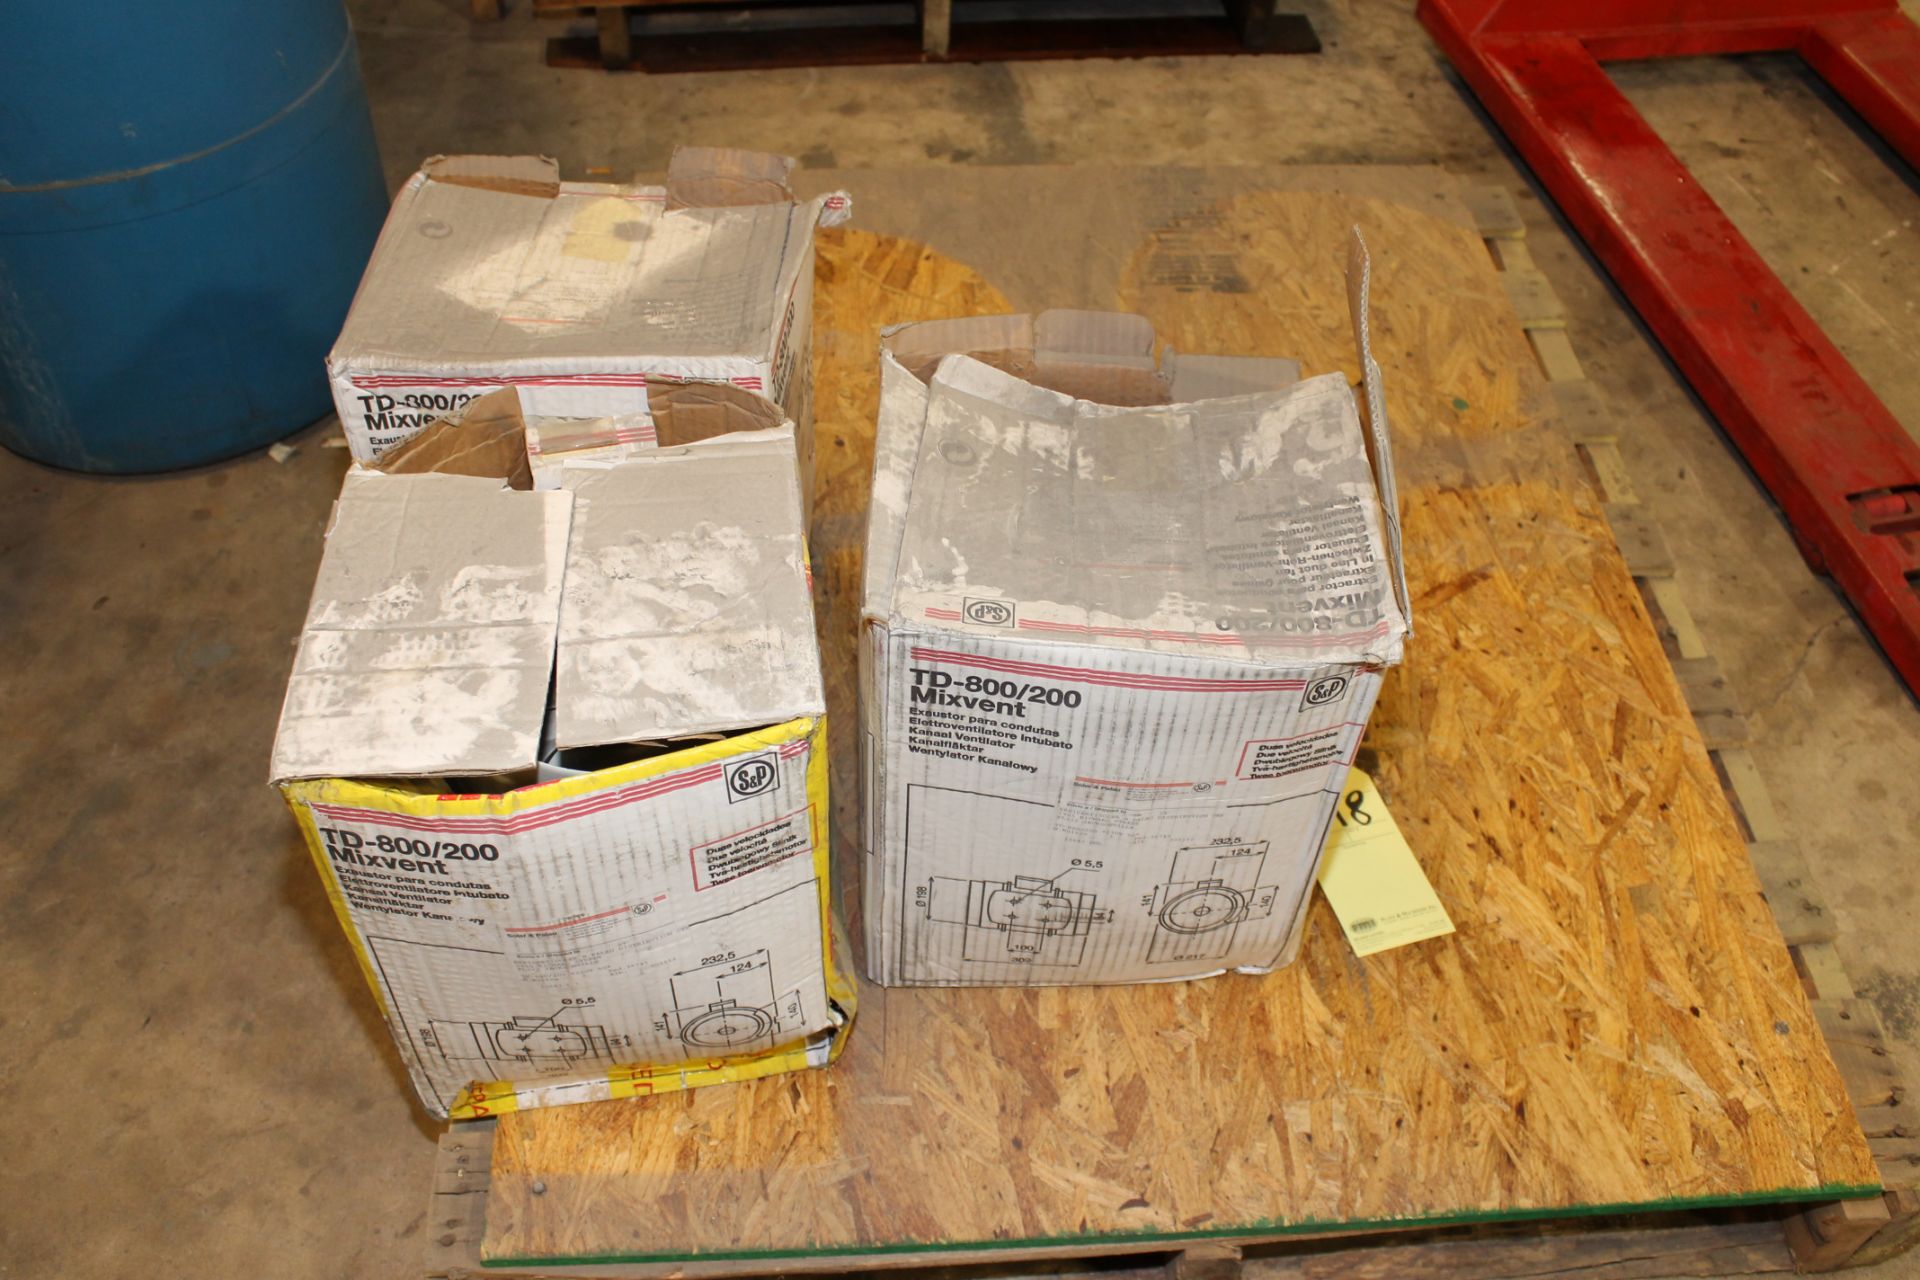 LOT OF EXHAUST FANS (3), S&P MDL. TD-800/200 MIXVENT  (Location D) - Image 2 of 2